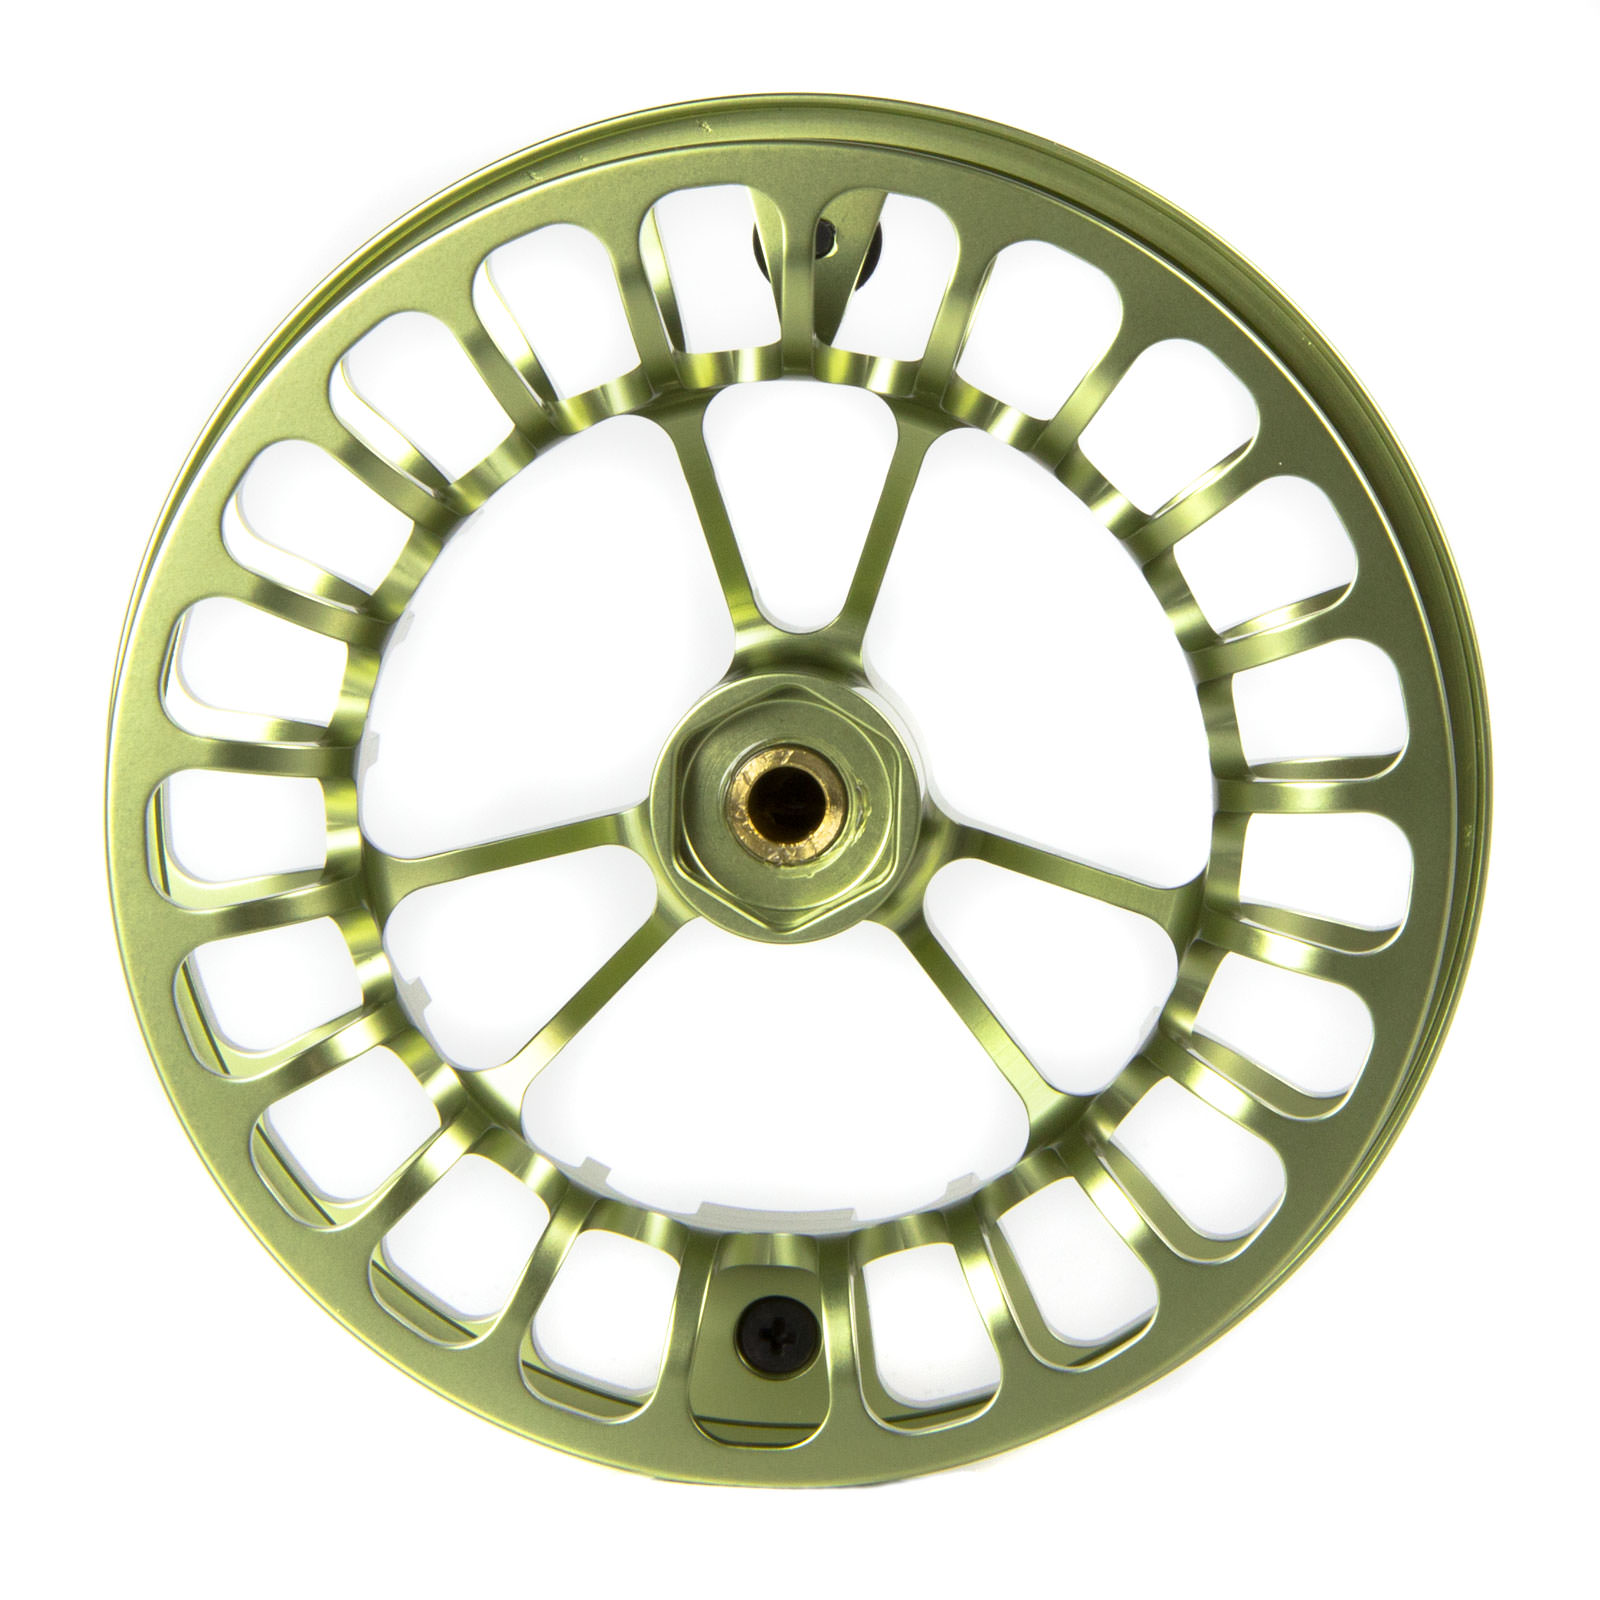 Redington Rise Iii Spare Spool Amber #5/6 For Fly Fishing